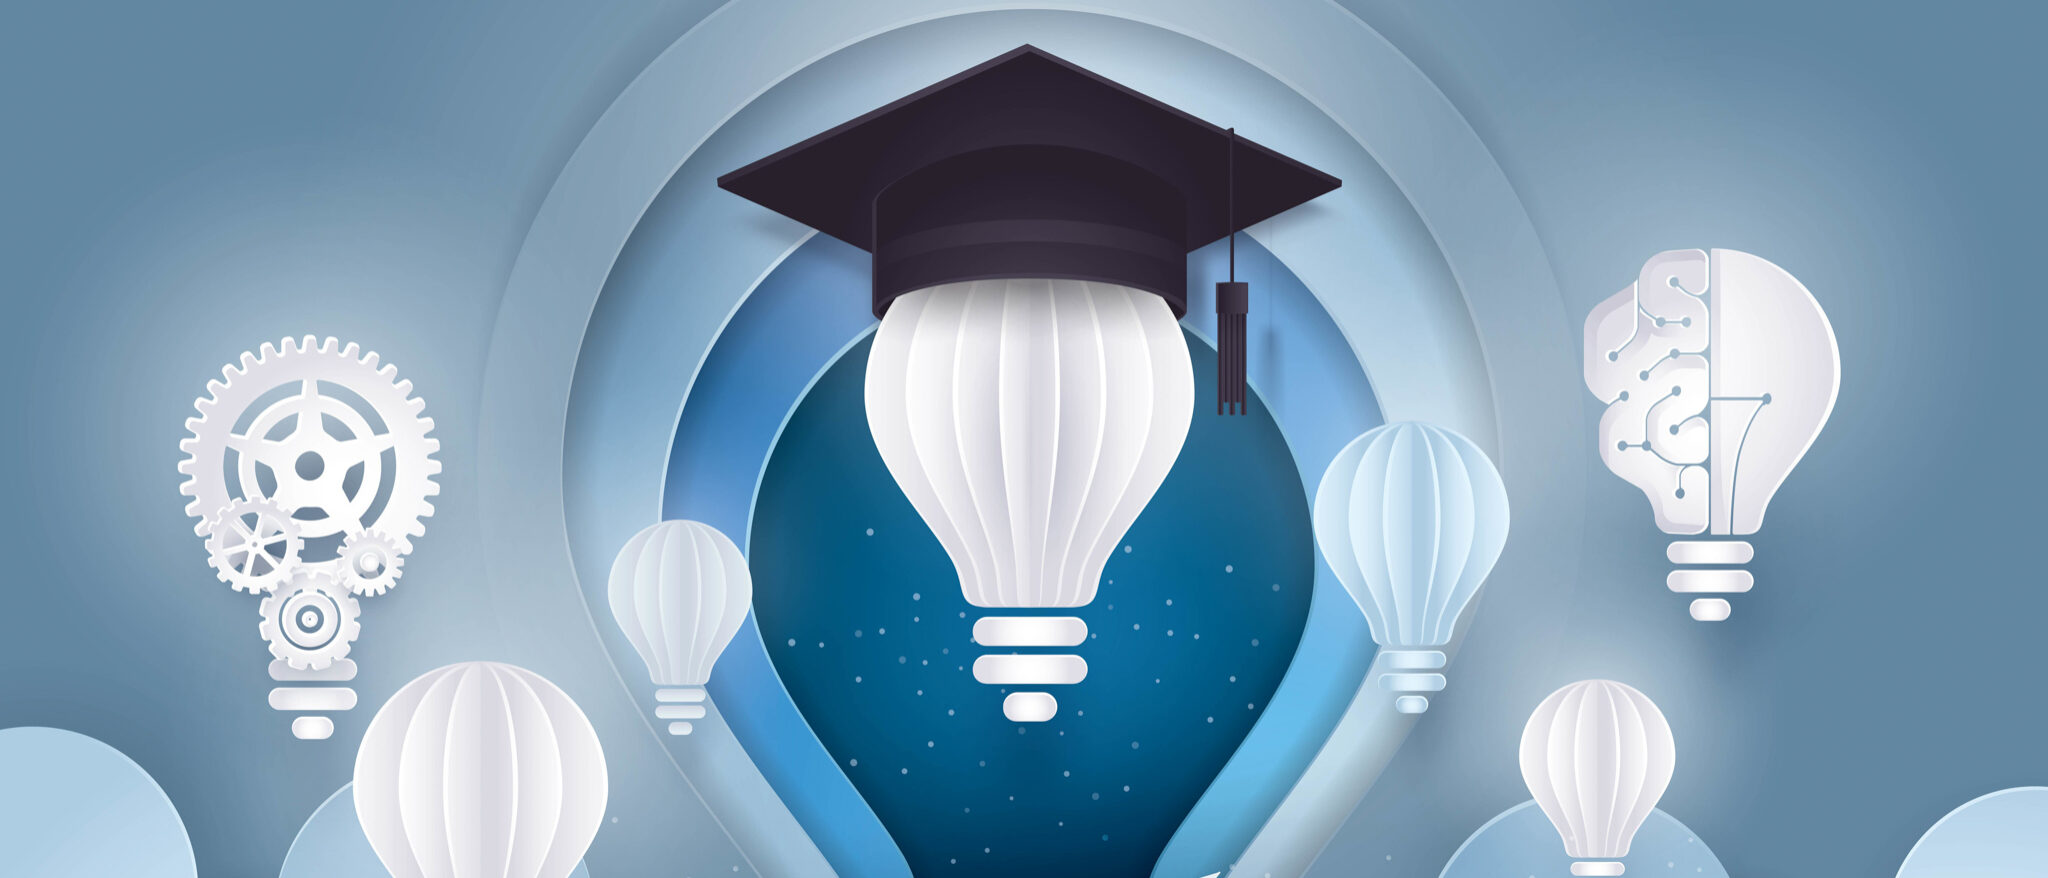 Converting a doctorate into business innovation